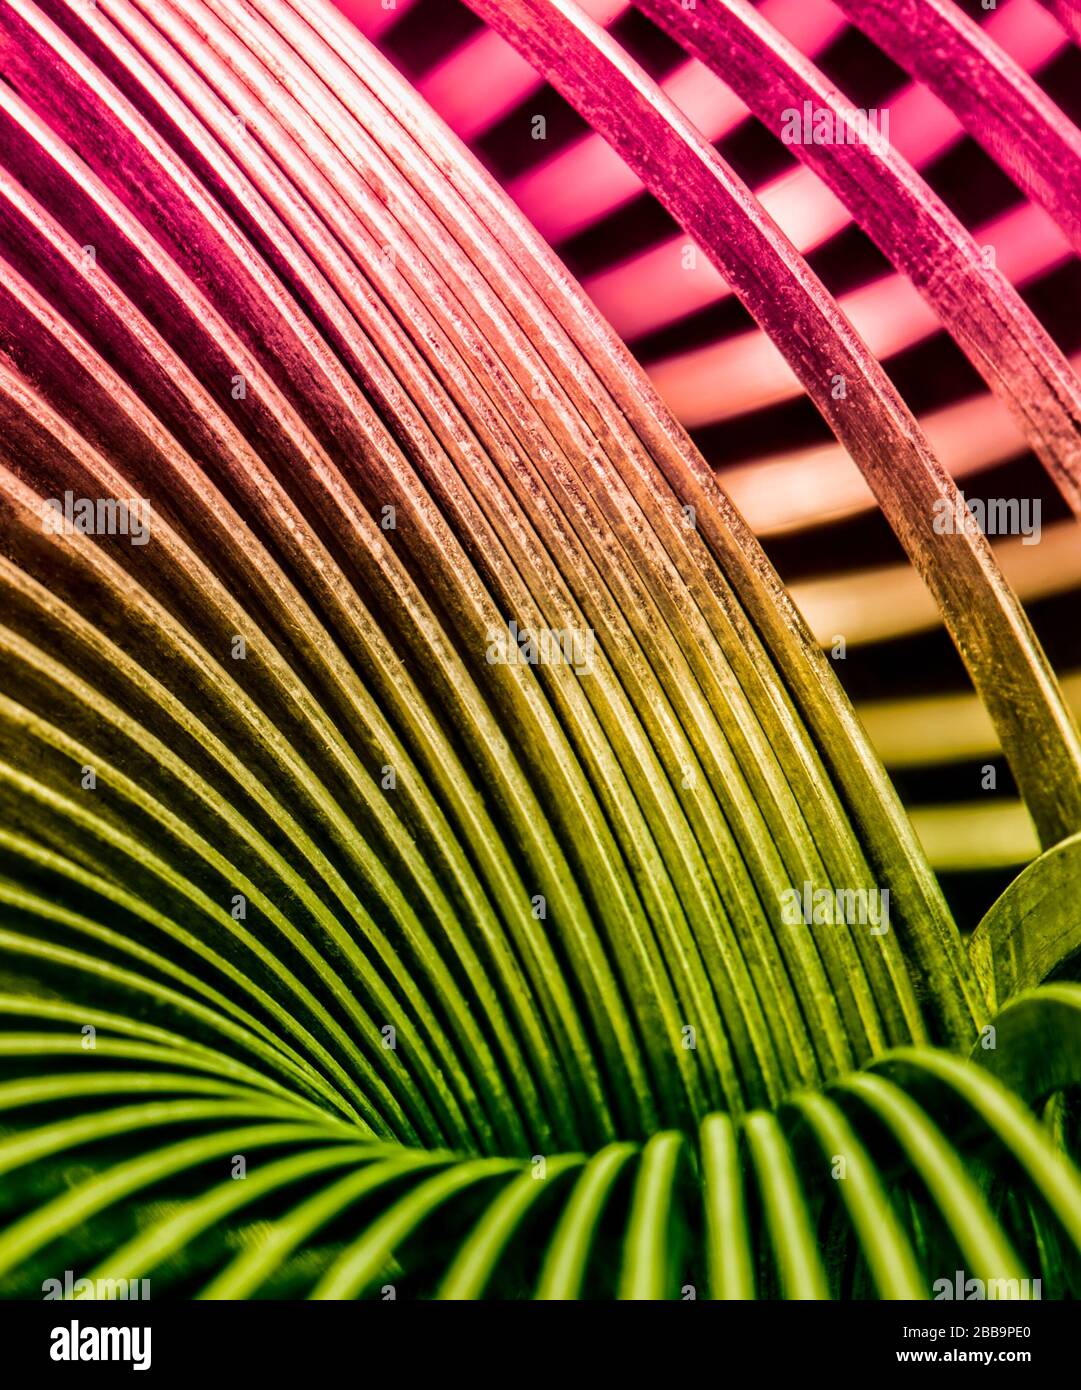 Geometric, playful, linear, neon pink and green design. Good for background Stock Photo